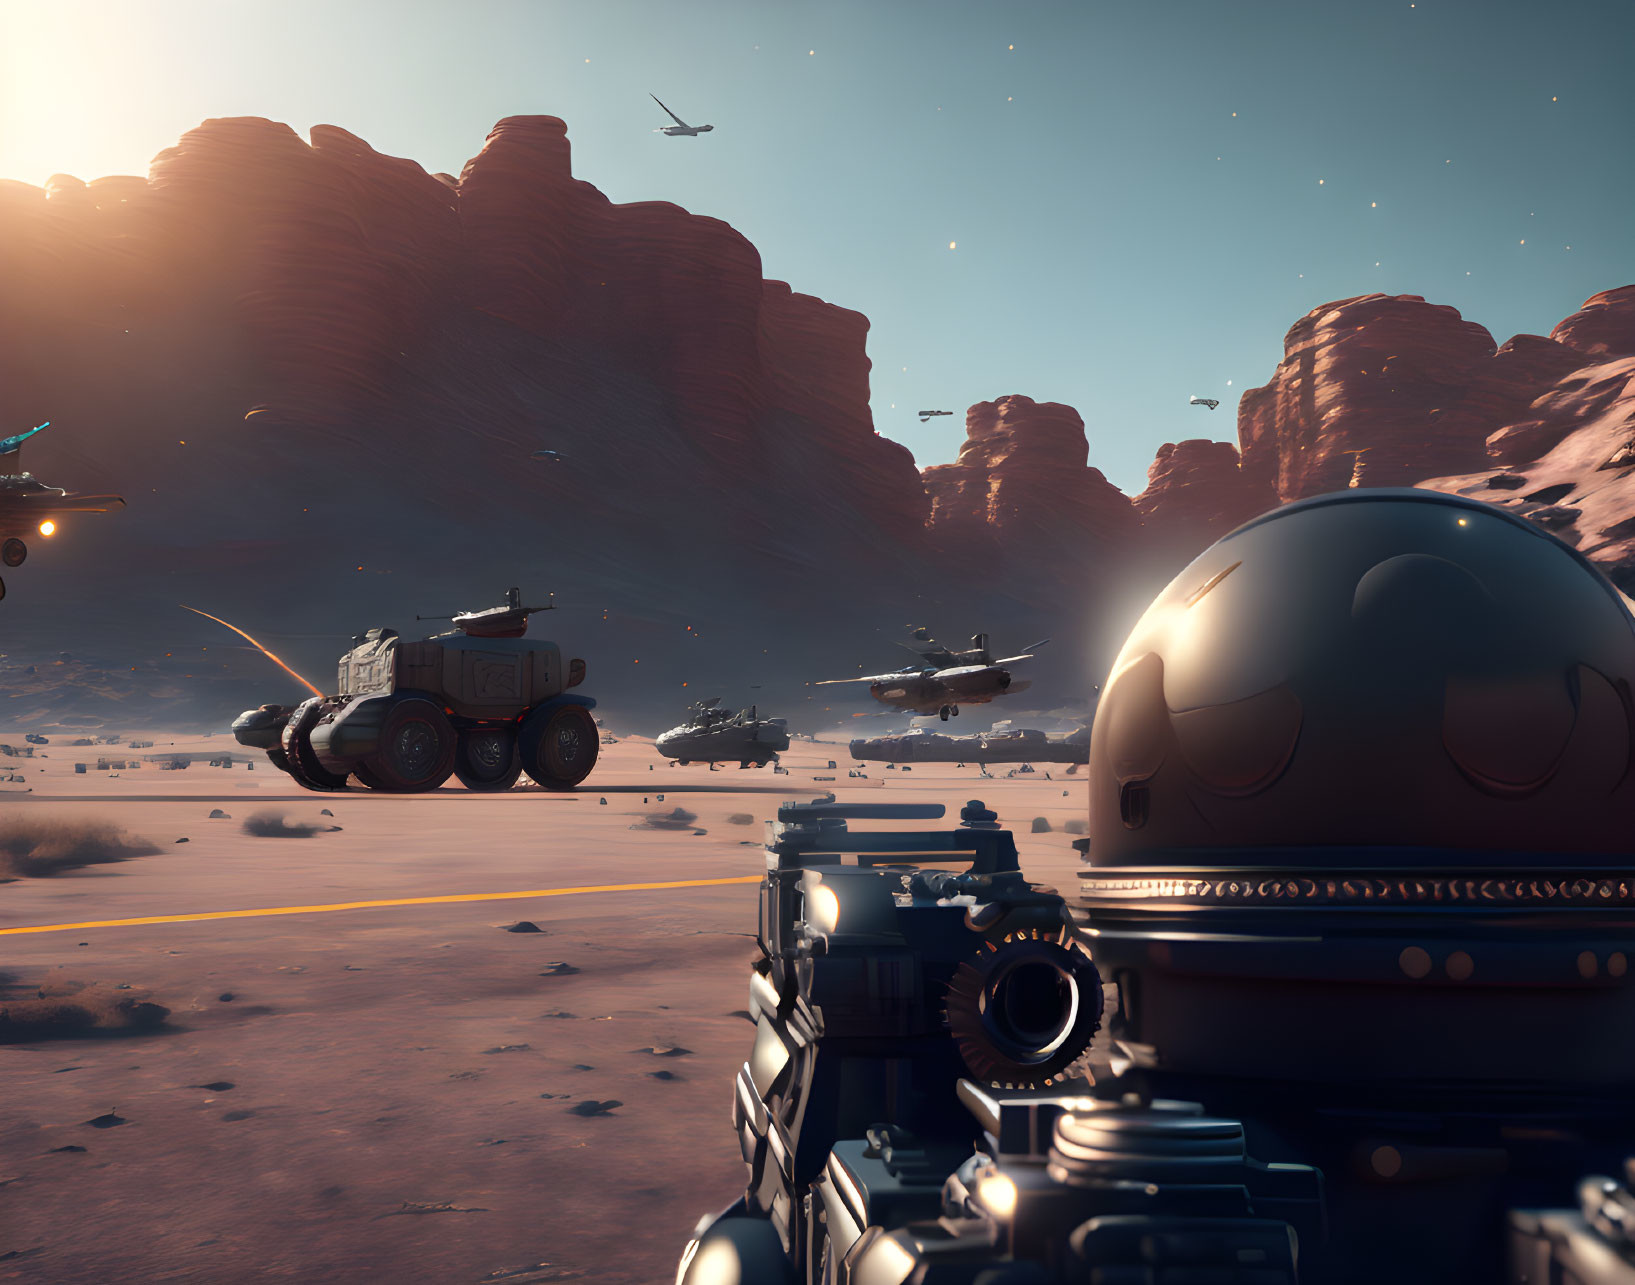 Futuristic desert landscape with aircraft, rover, and rock formations